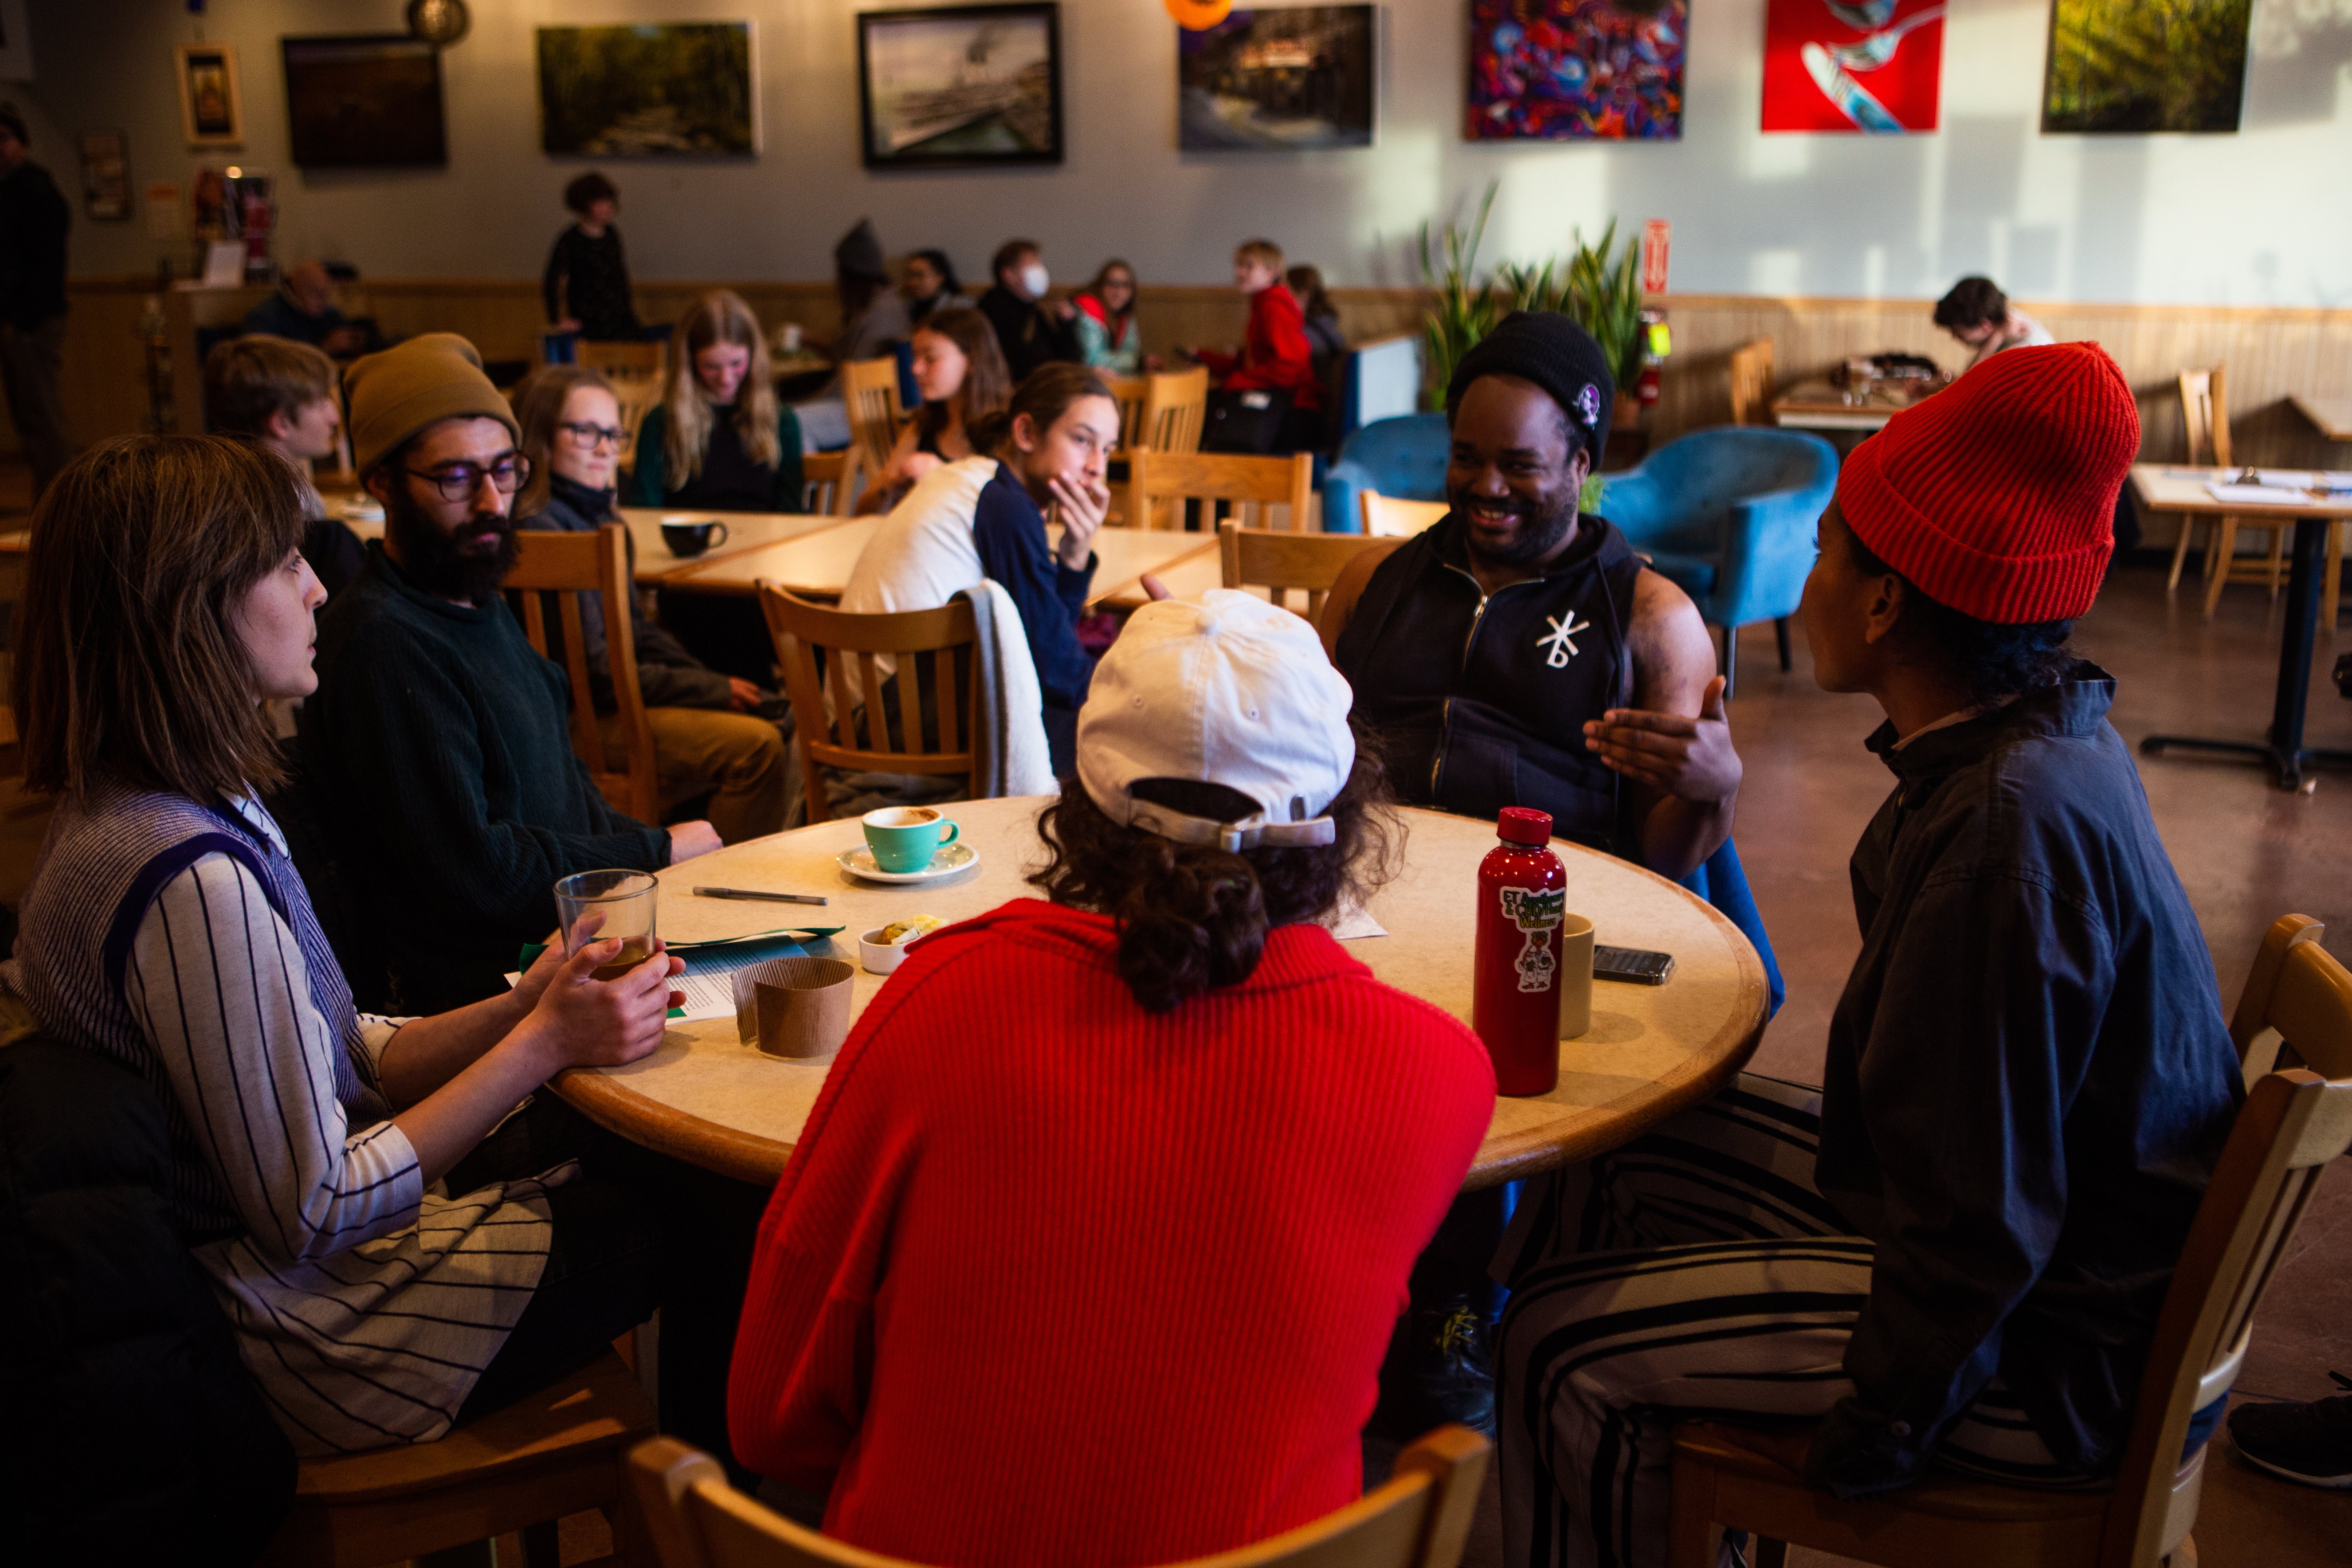 A group of participants sit at a round table during Evertday Performances Artist Rights Photo By Lindsey Yoneda